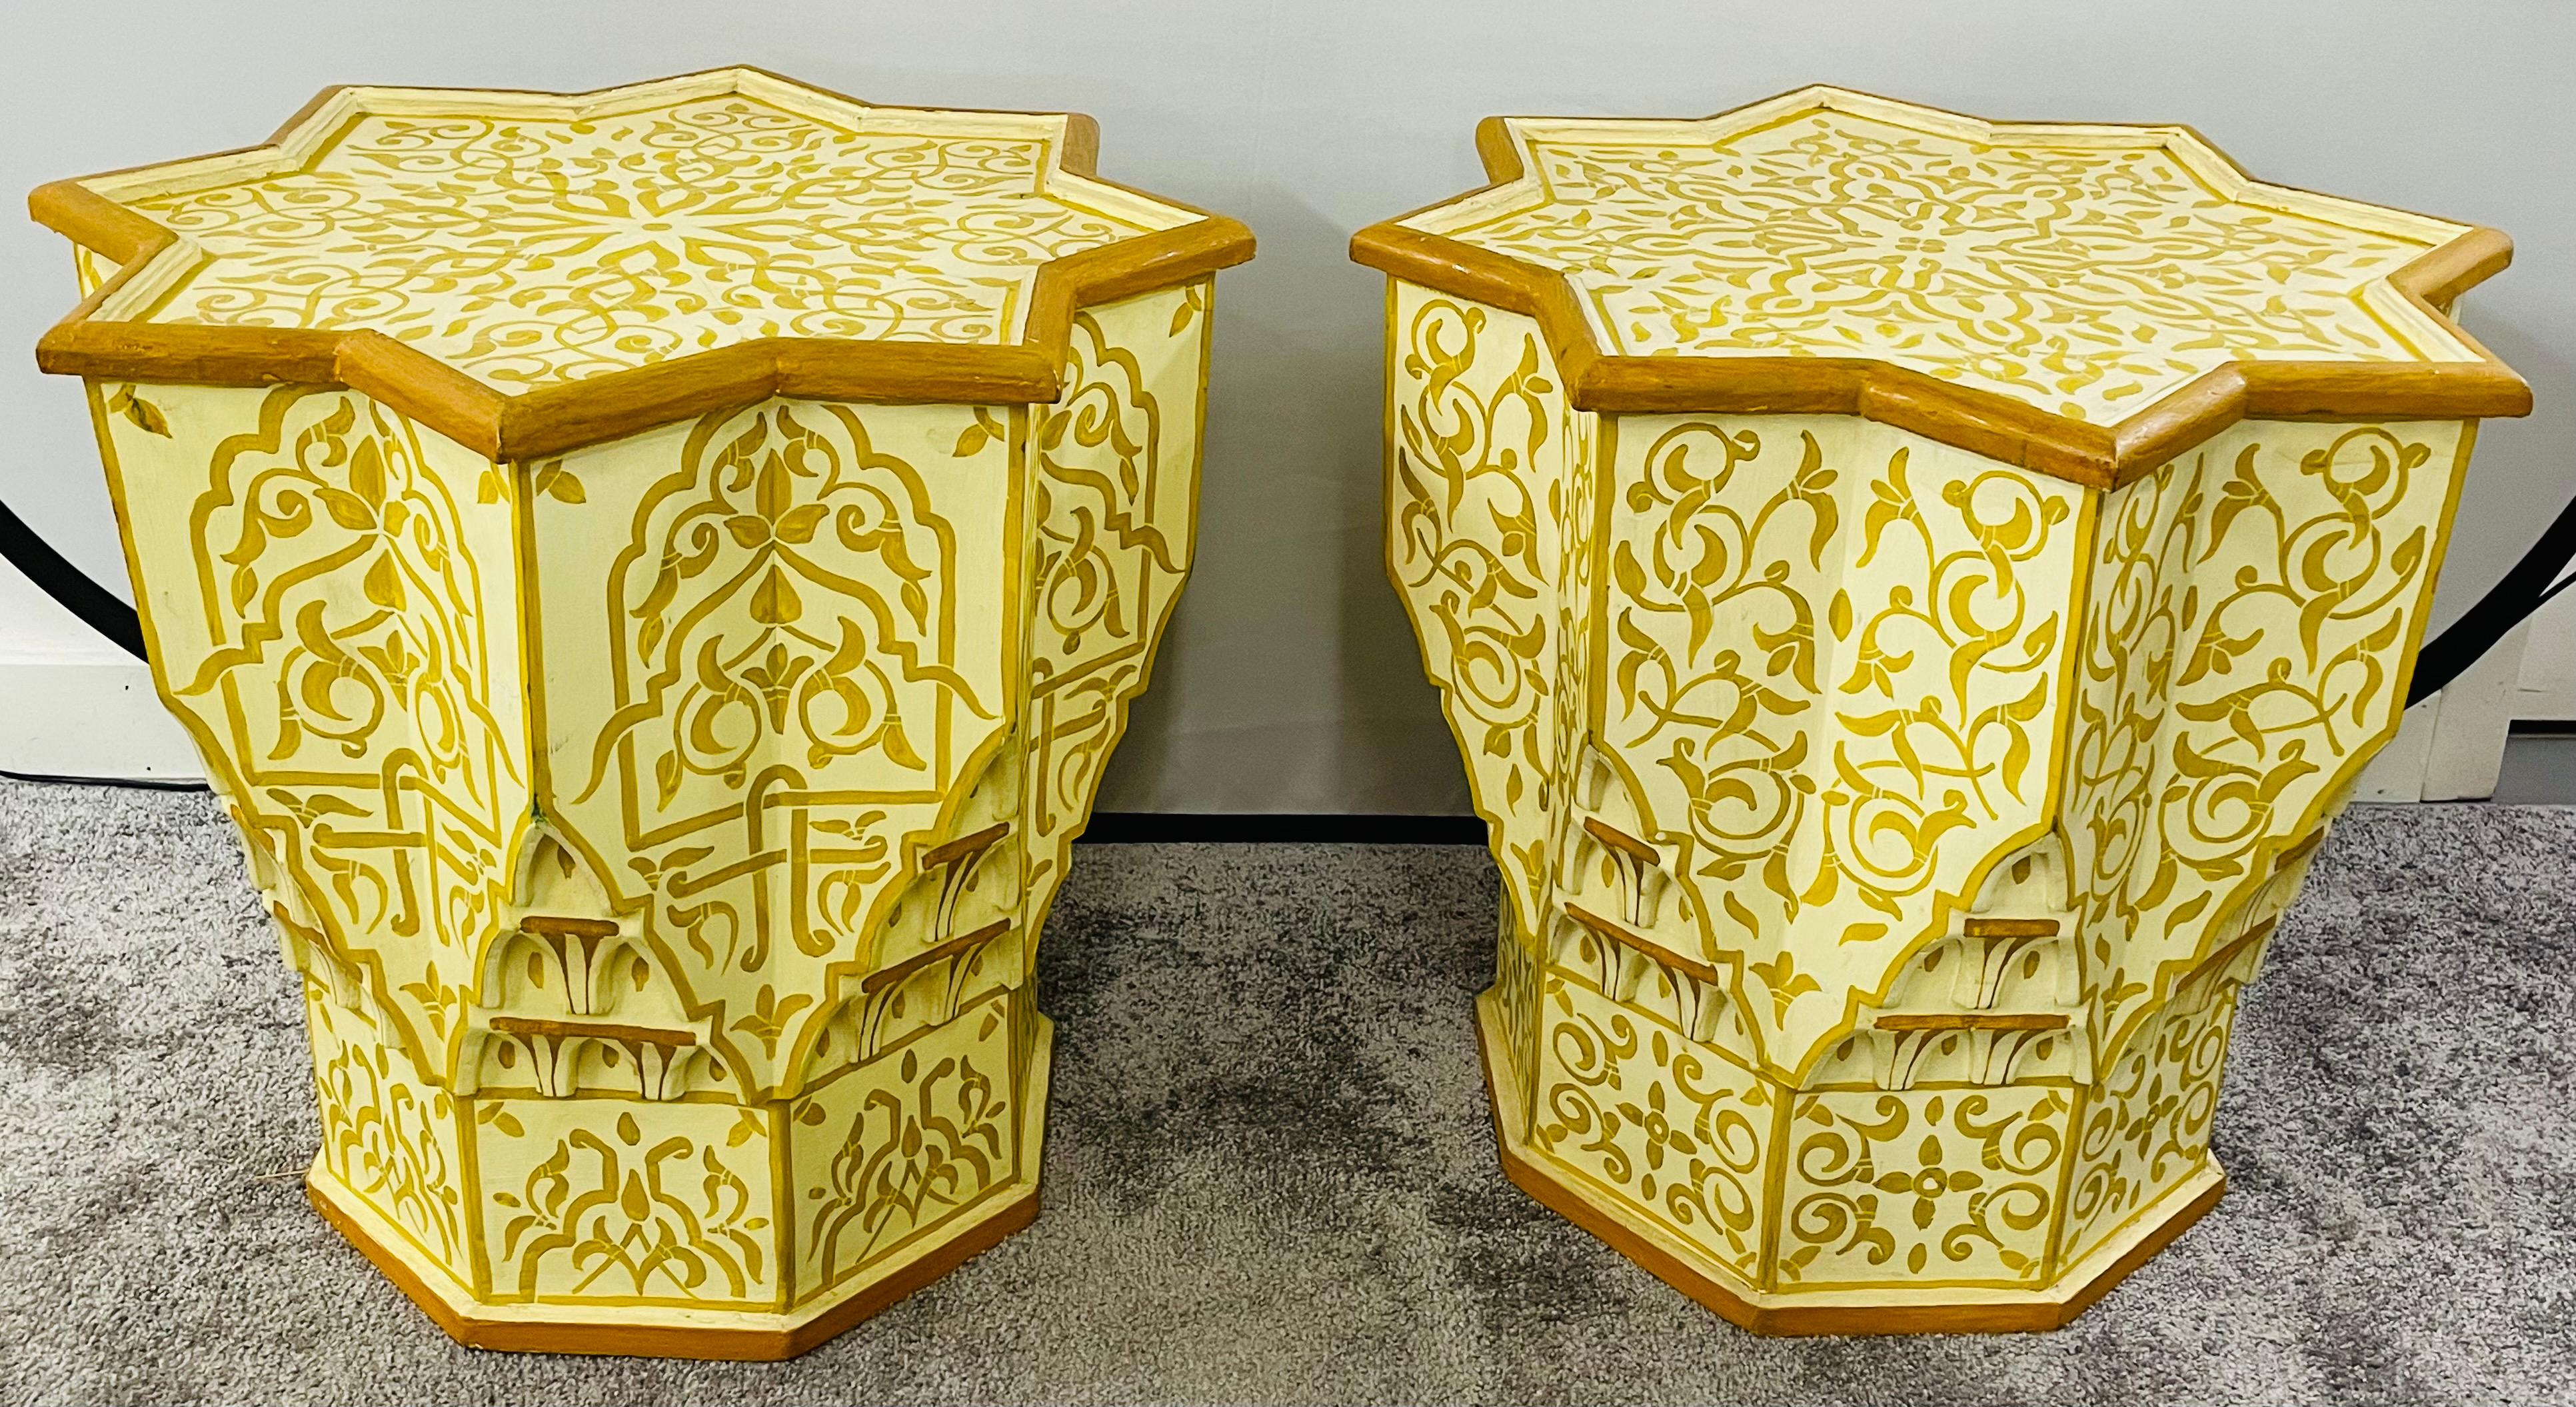 An exquisite pair of vintage Moroccan hand painted end or side tables with beautiful arabesque Moorish motifs decorating the full top and sides ion the table. The table top is star shaped and the sides are hand carved showing refined details. And